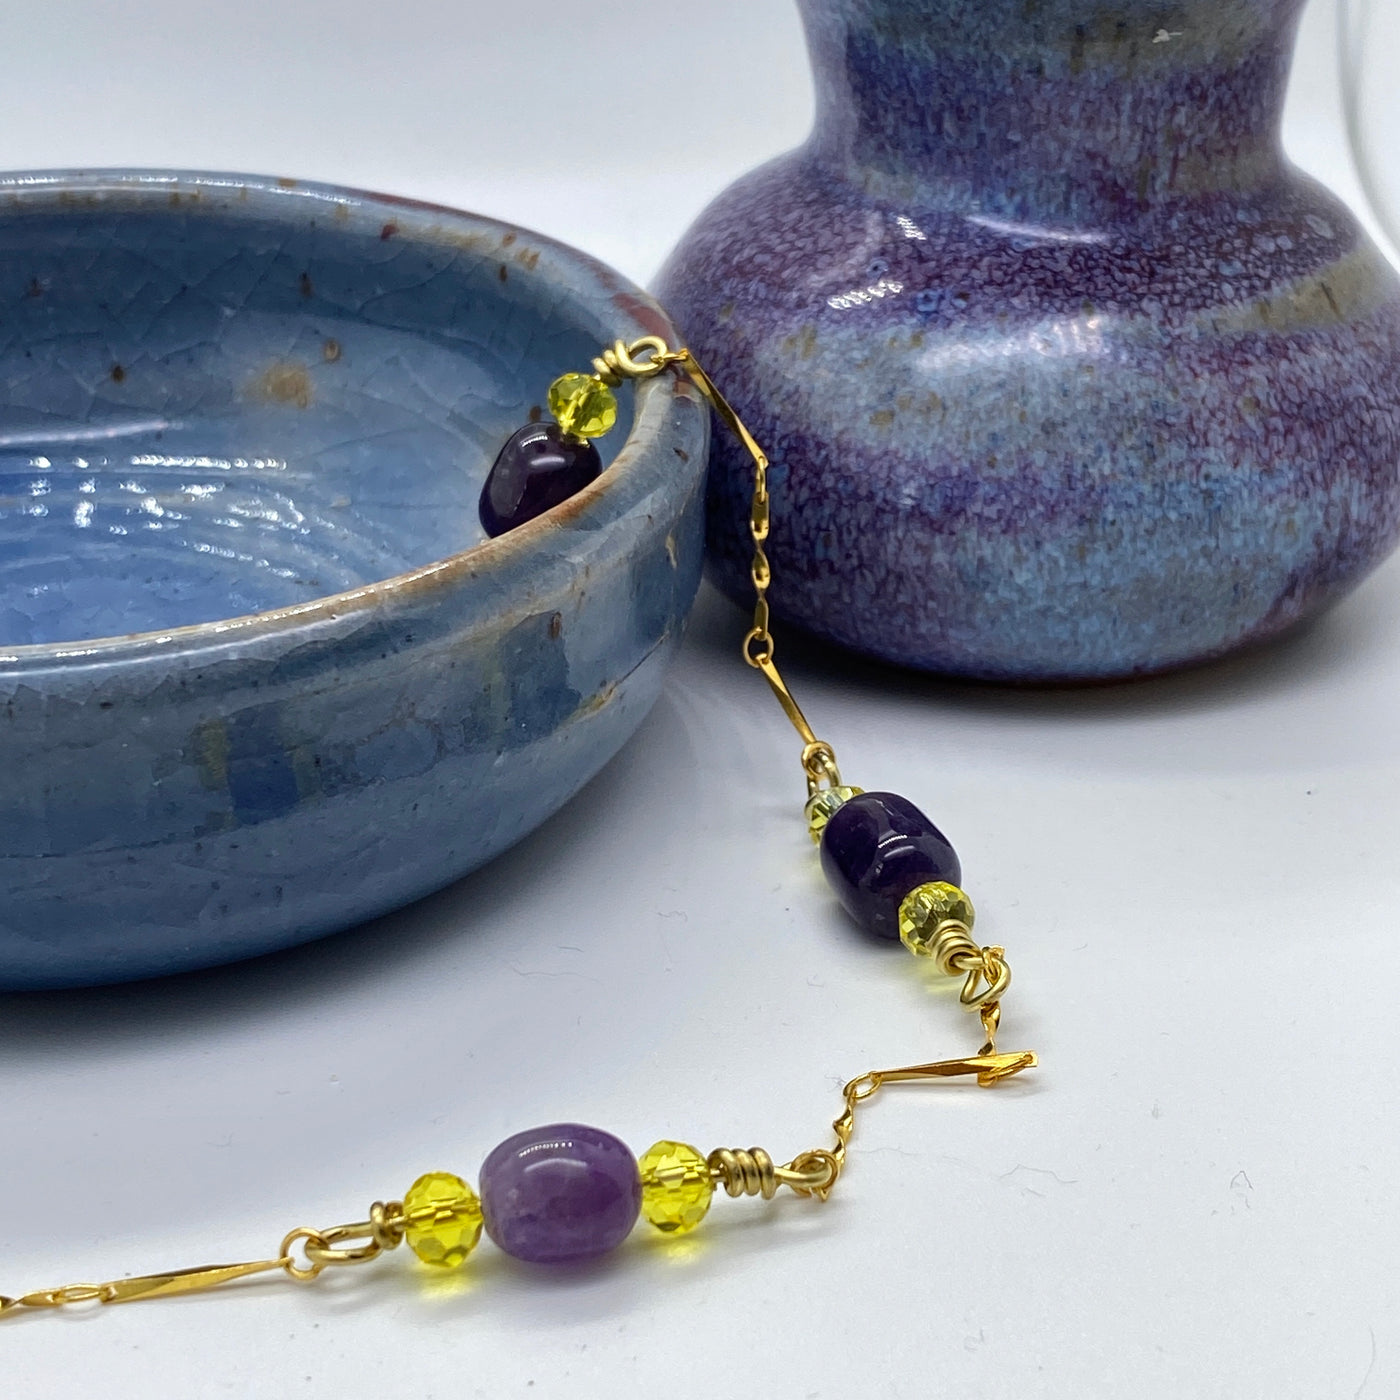 Amethysts beads and crystal yellow rondelles necklace